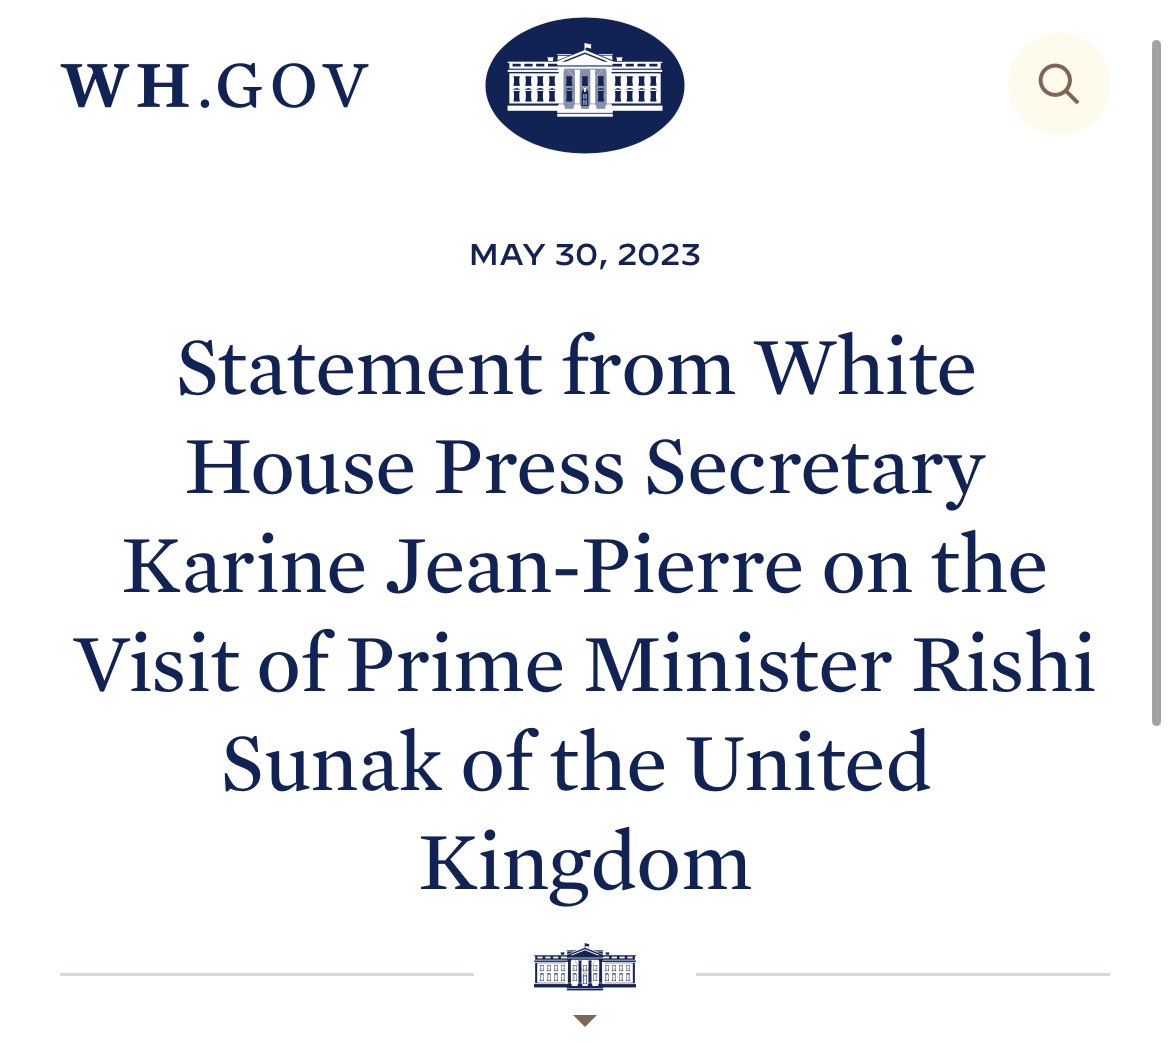 Prime Minister @RishiSunak will visit the US next week 🇬🇧🤝🇺🇸 He will meet @POTUS Biden to discuss deepening our extensive security and economic partnerships. whitehouse.gov/briefing-room/…